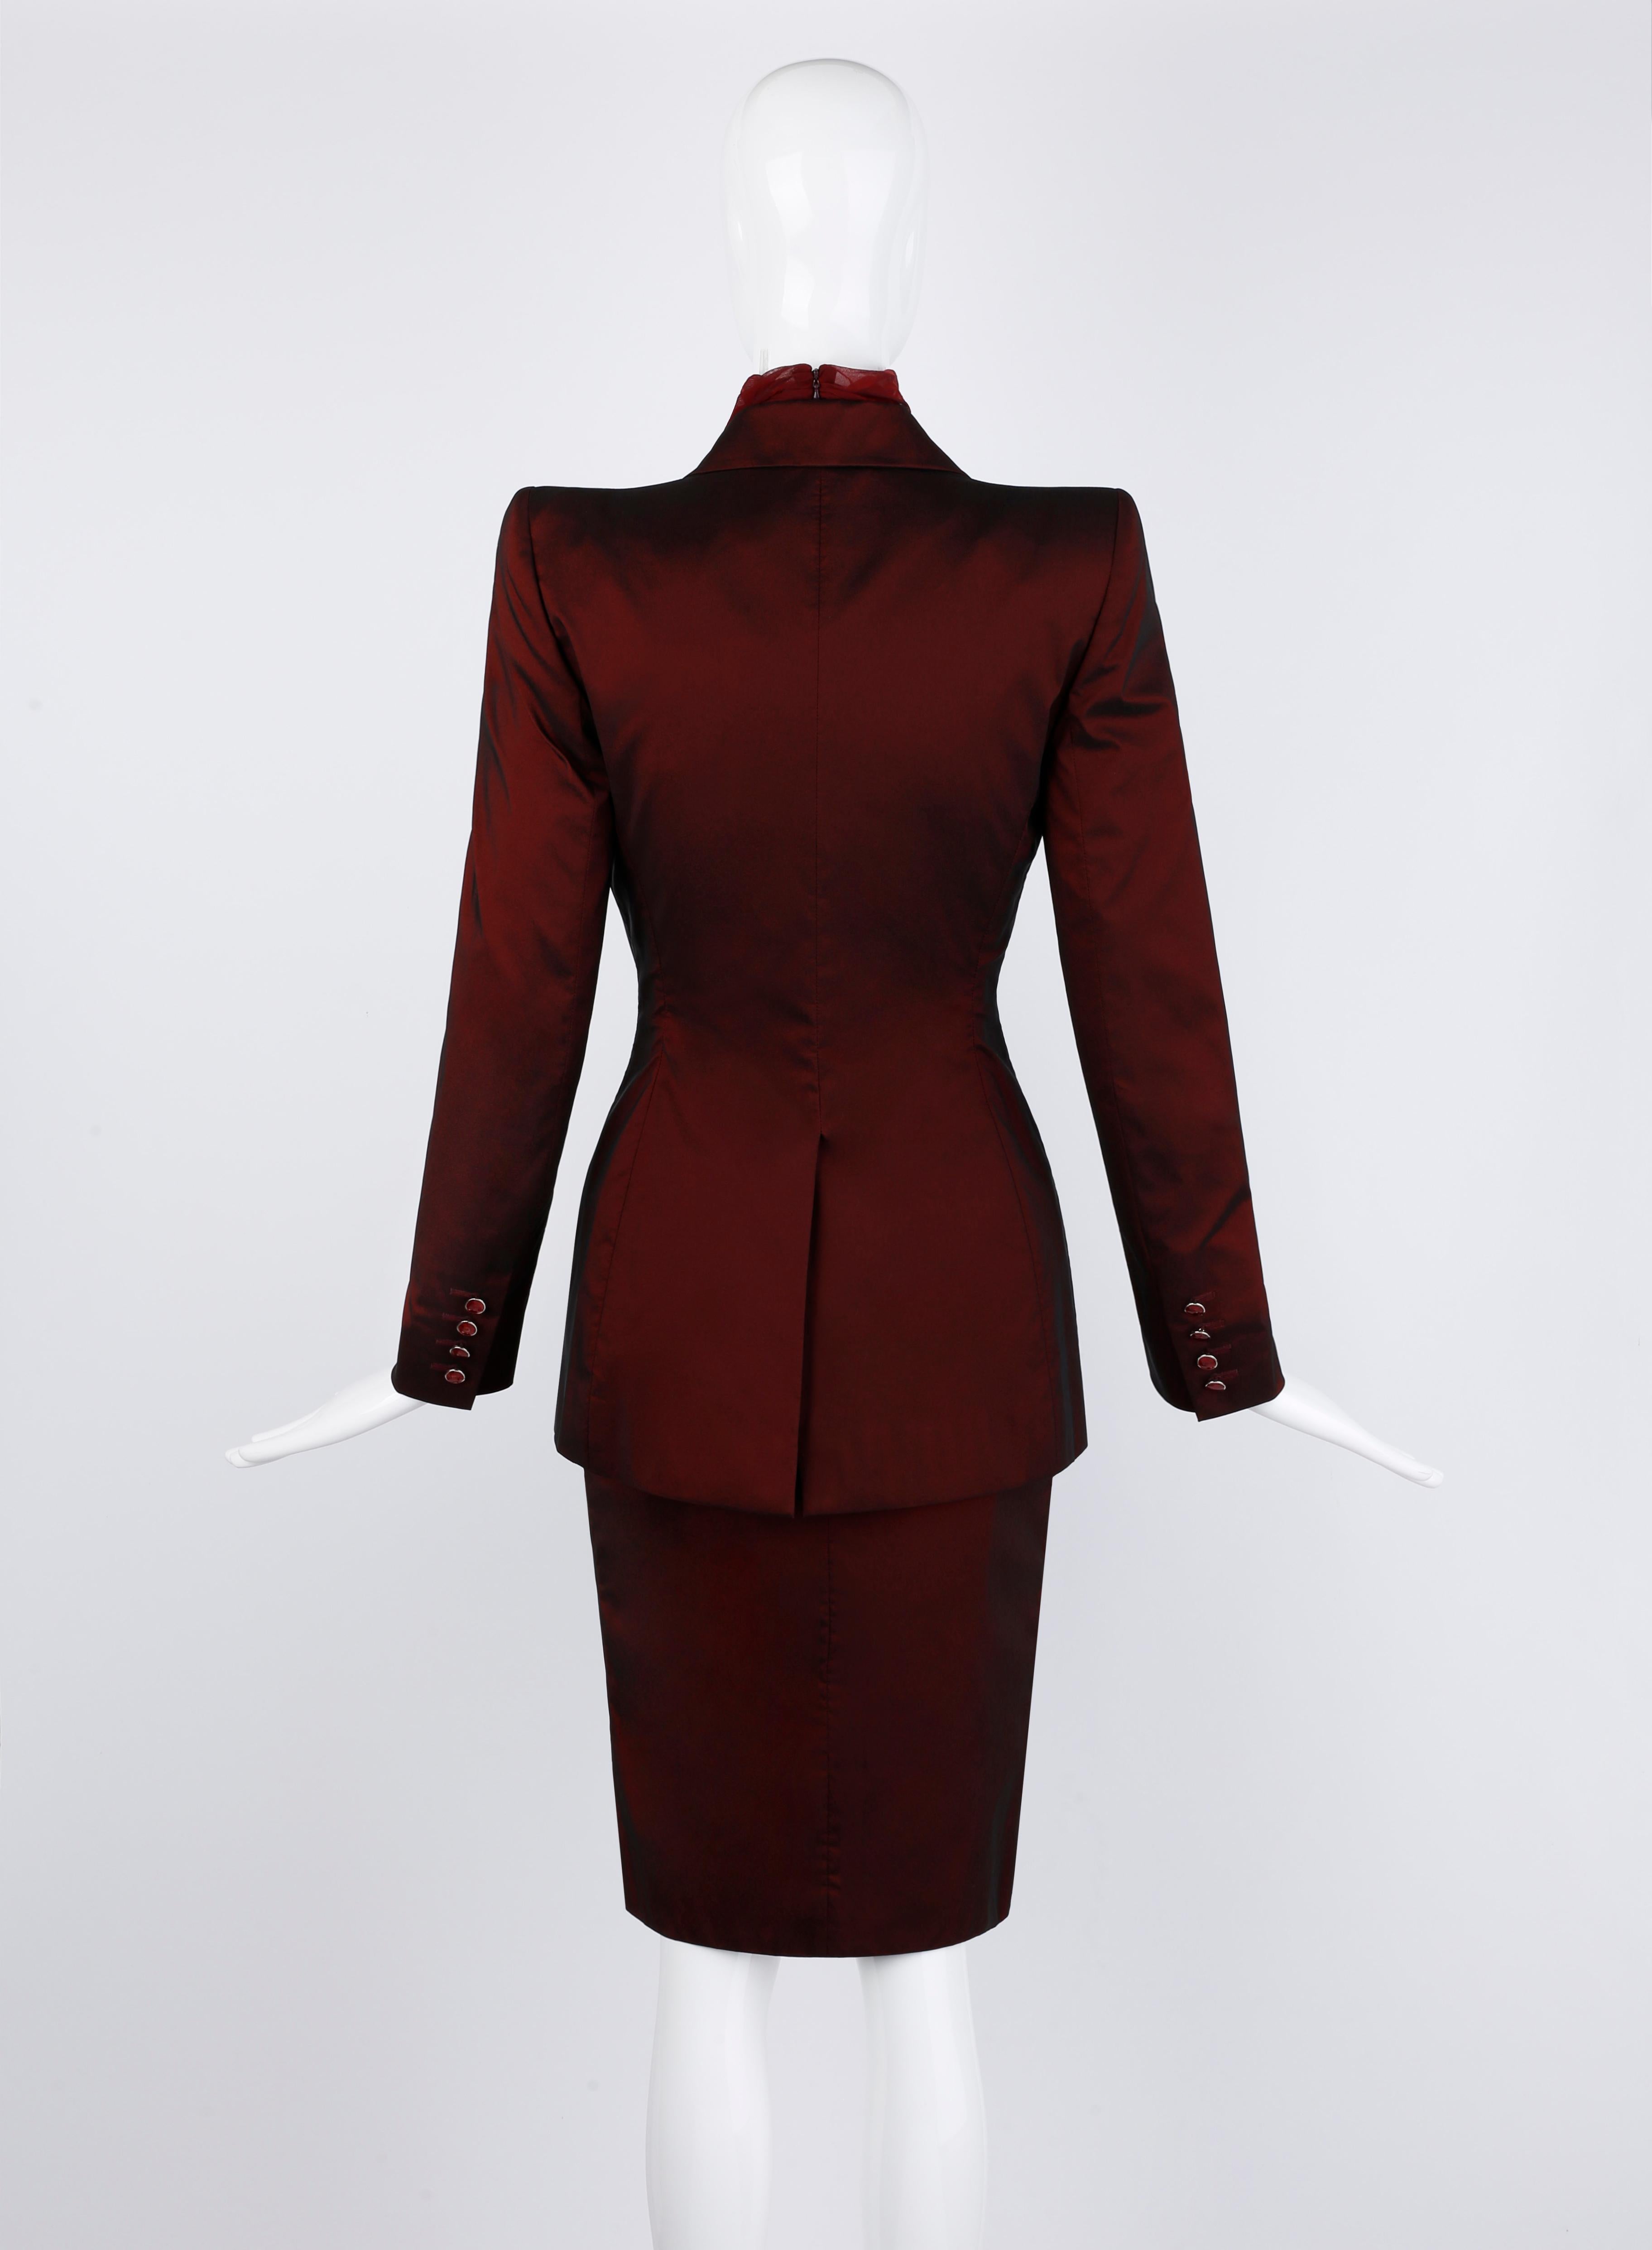 Givenchy Couture Alexander McQueen F/W 1998 Sheer Mock Neck Dress & Blazer Suit For Sale 7